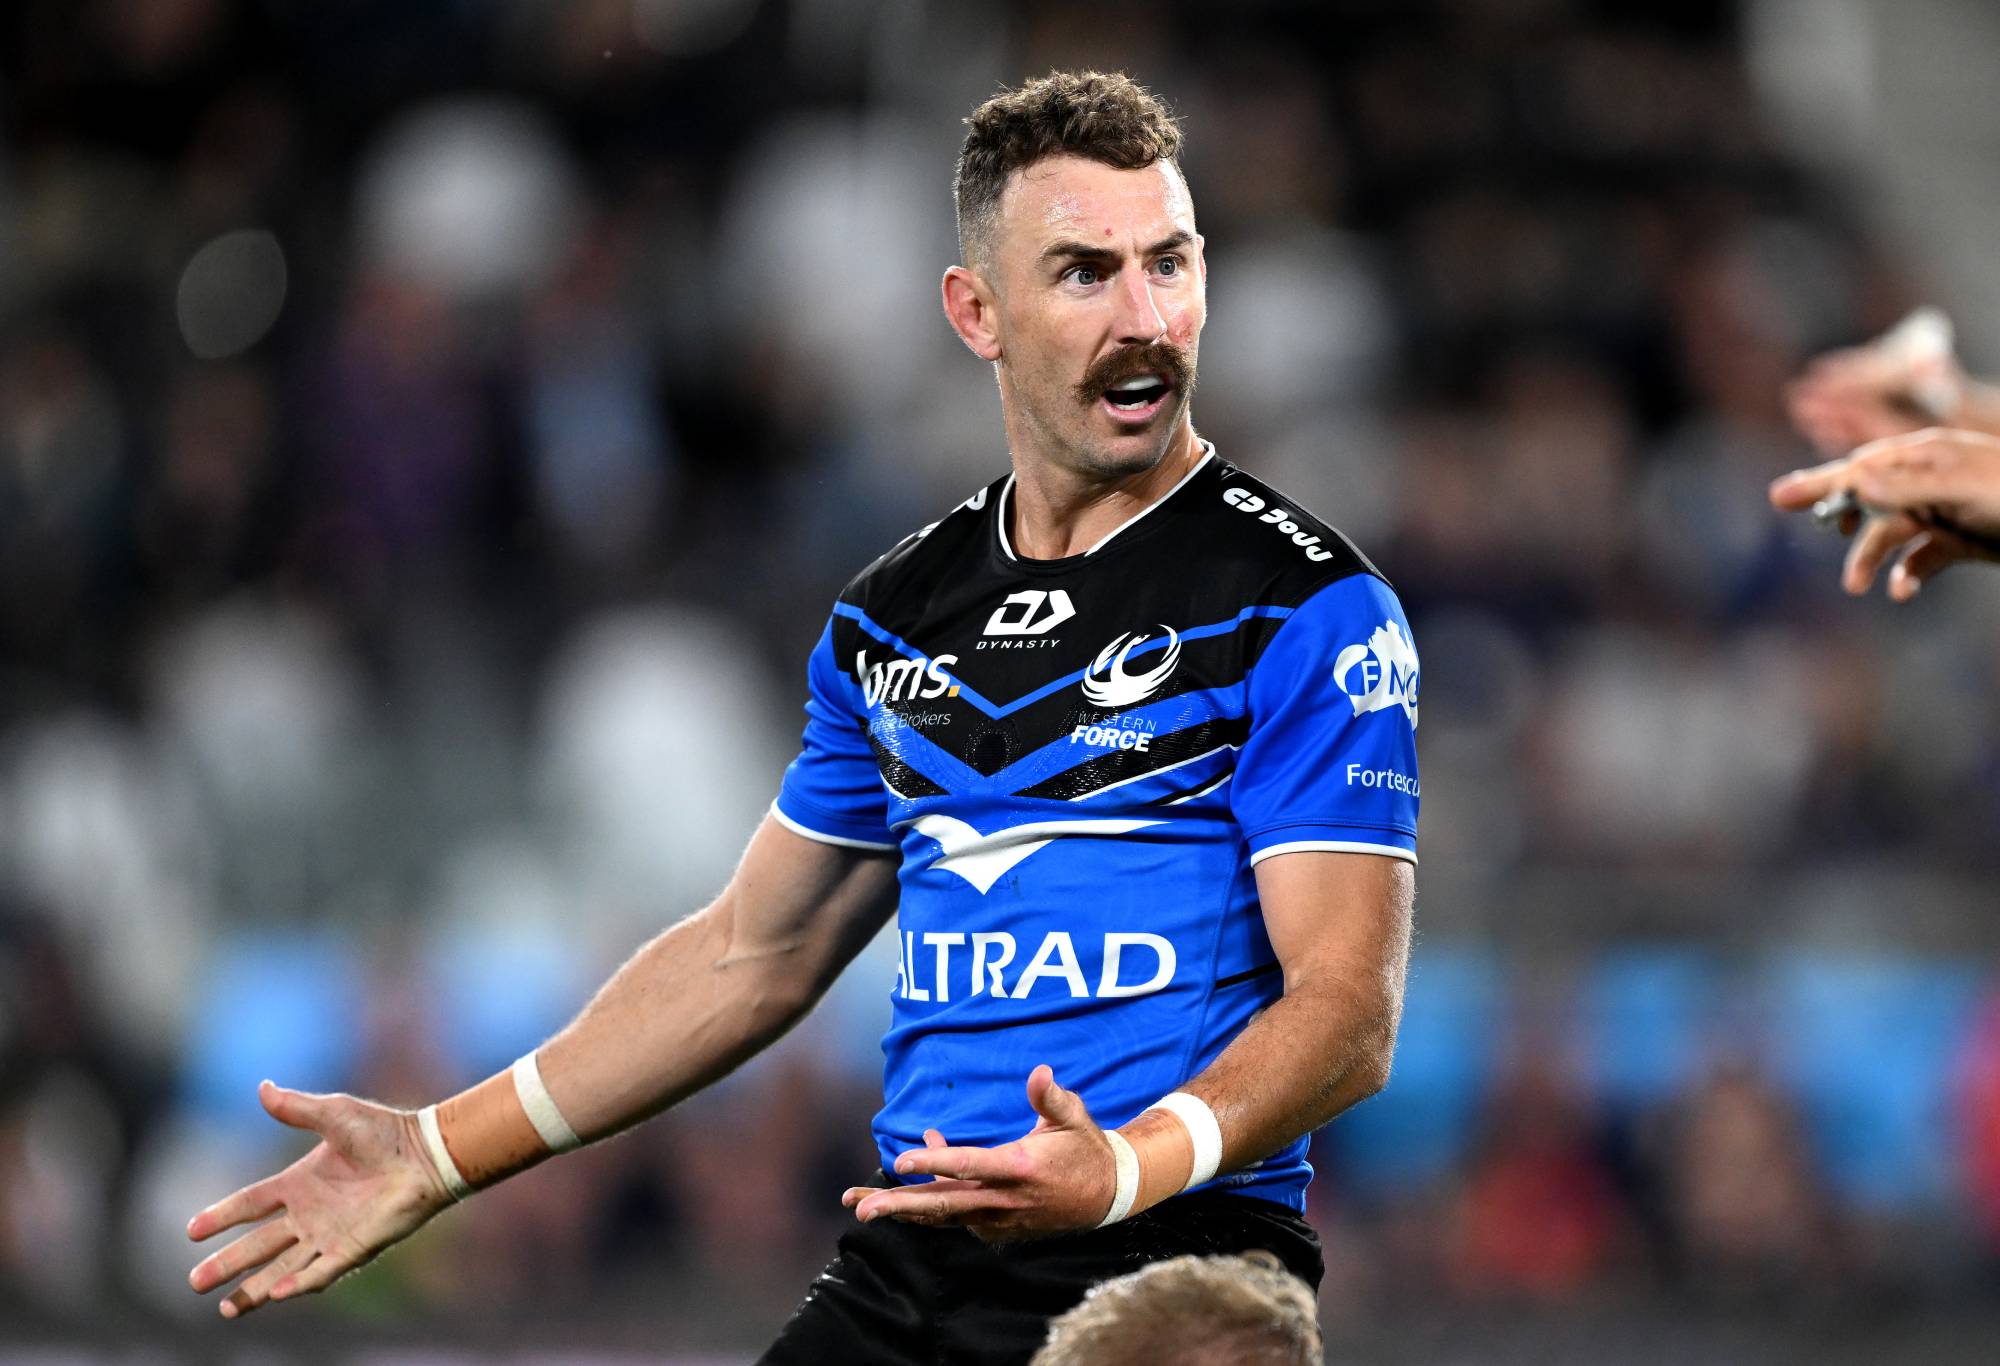 Western Force ‘let slip’ another match in huge blow to finals hopes in one-try game – but it’s not all bad news